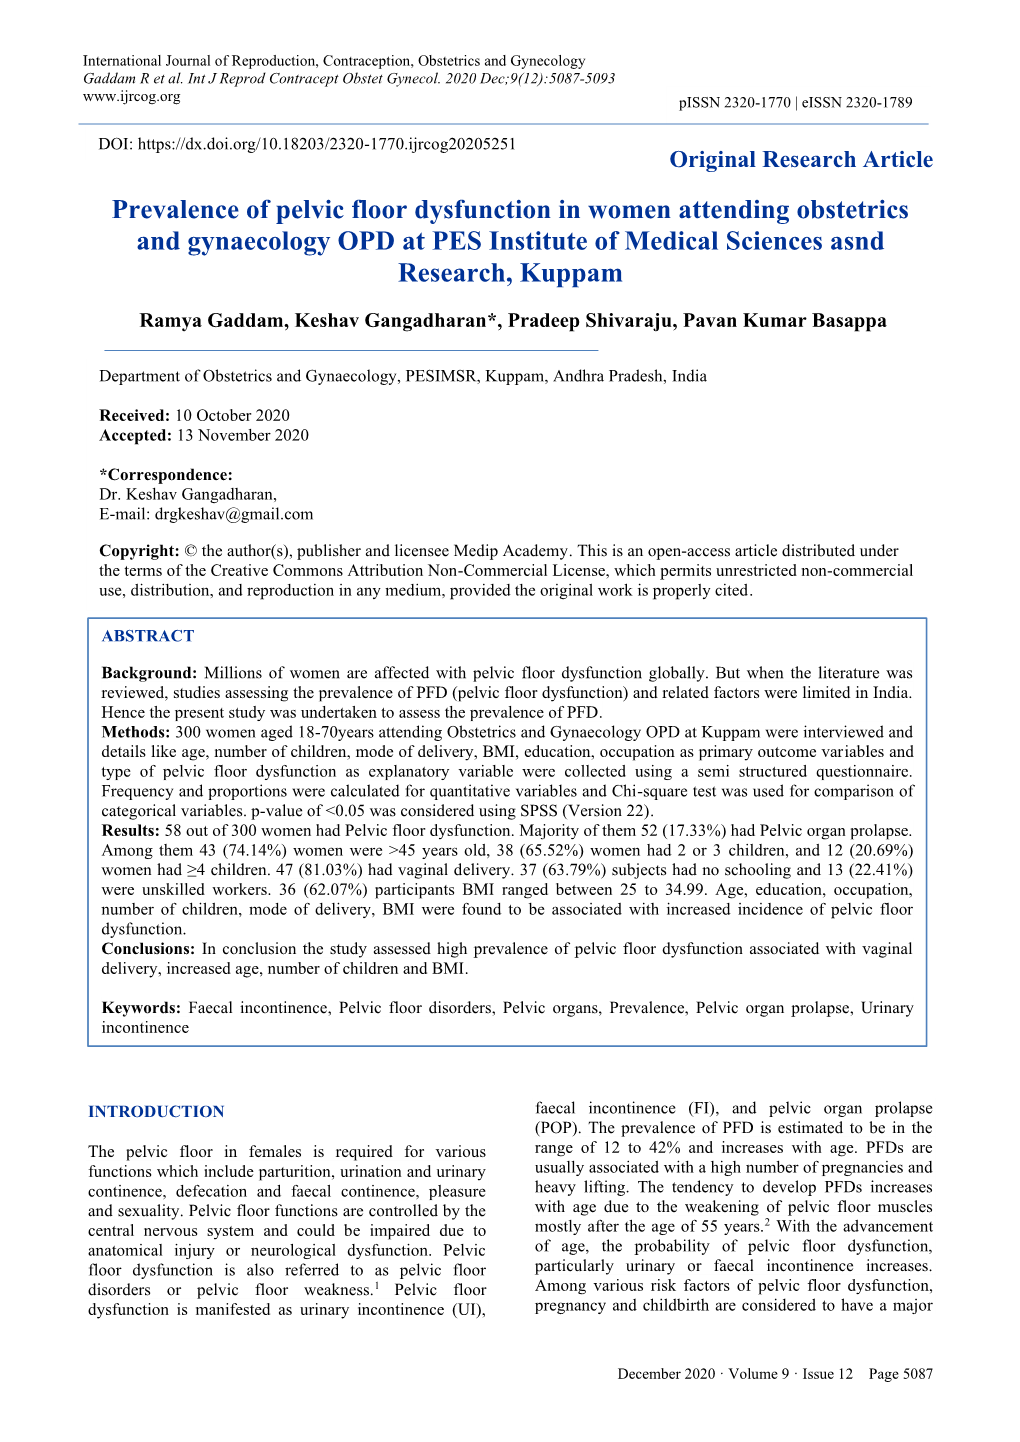 Prevalence of Pelvic Floor Dysfunction in Women Attending Obstetrics and Gynaecology OPD at PES Institute of Medical Sciences Asnd Research, Kuppam